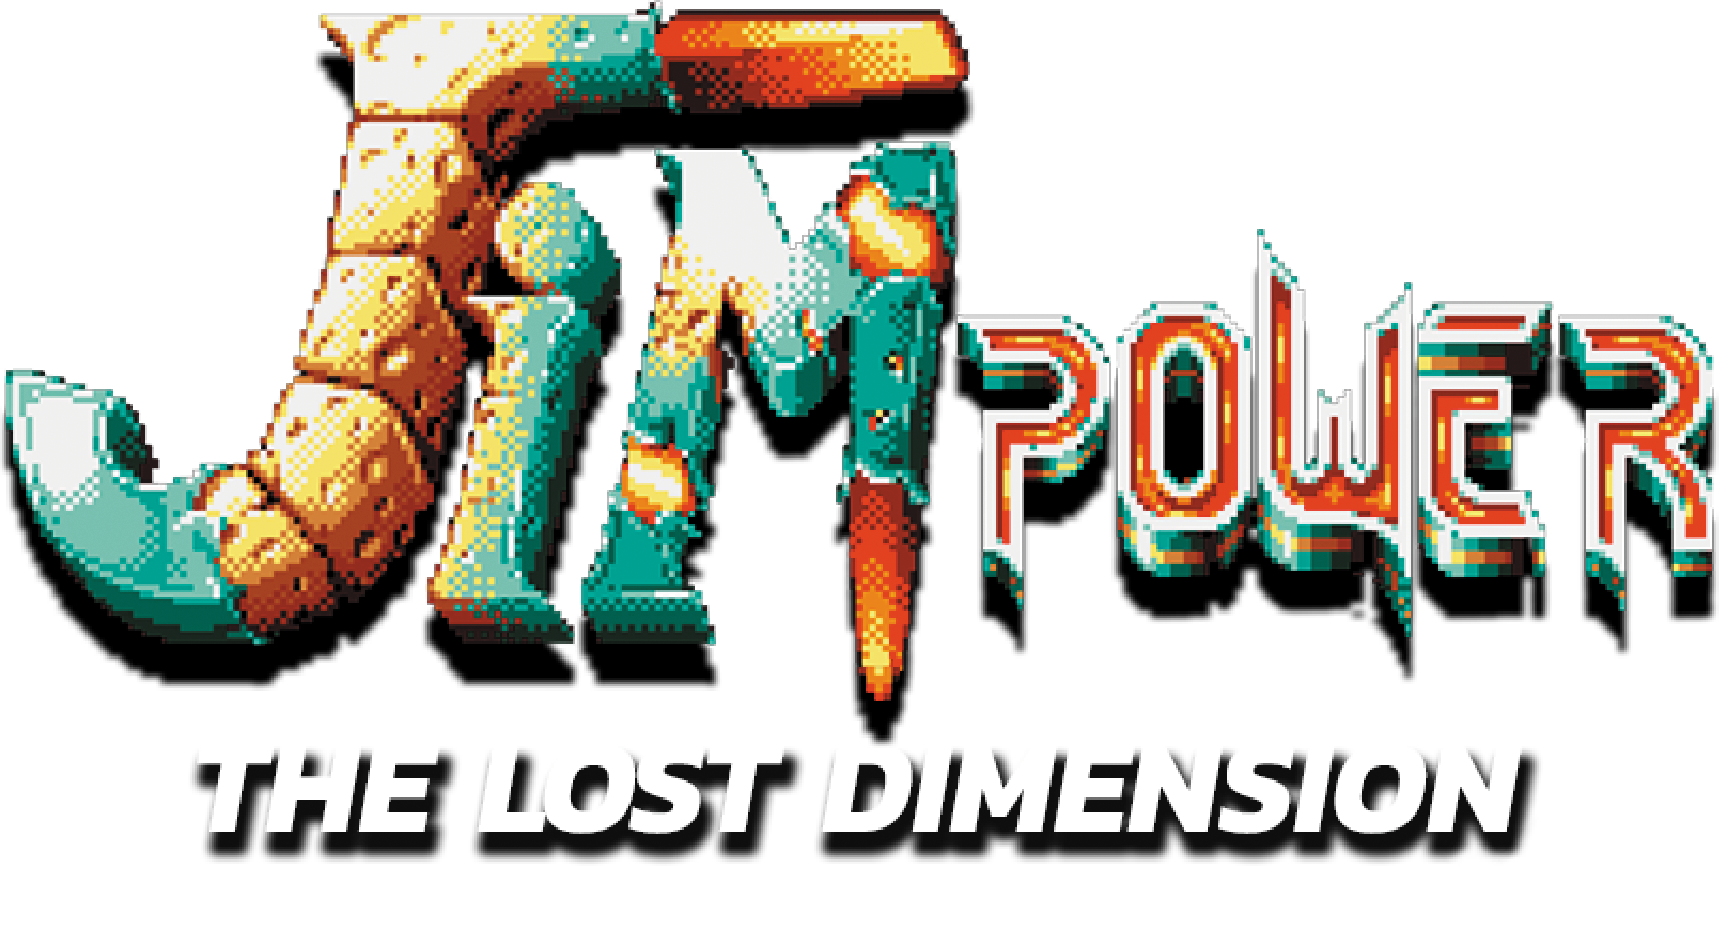 Jim Power: The Lost Dimension